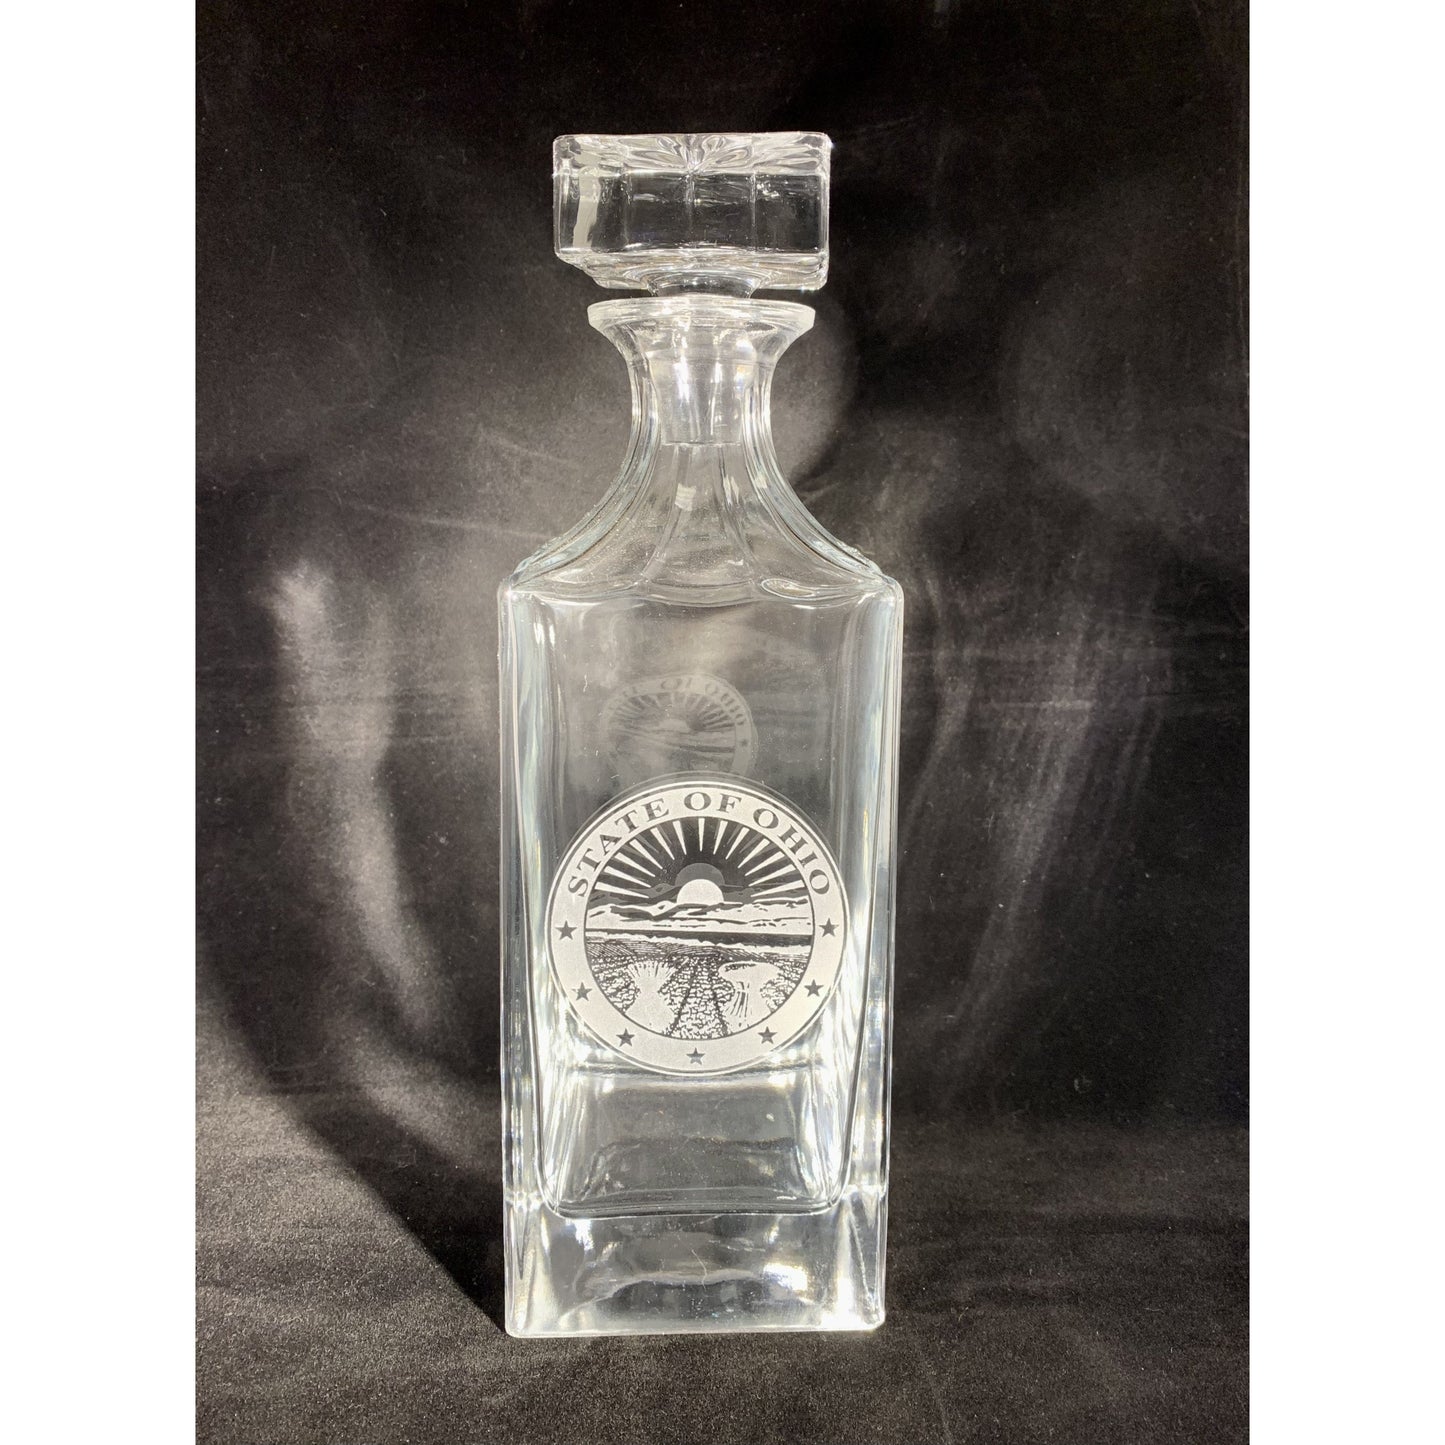 State Seal Glass Etched Decanter